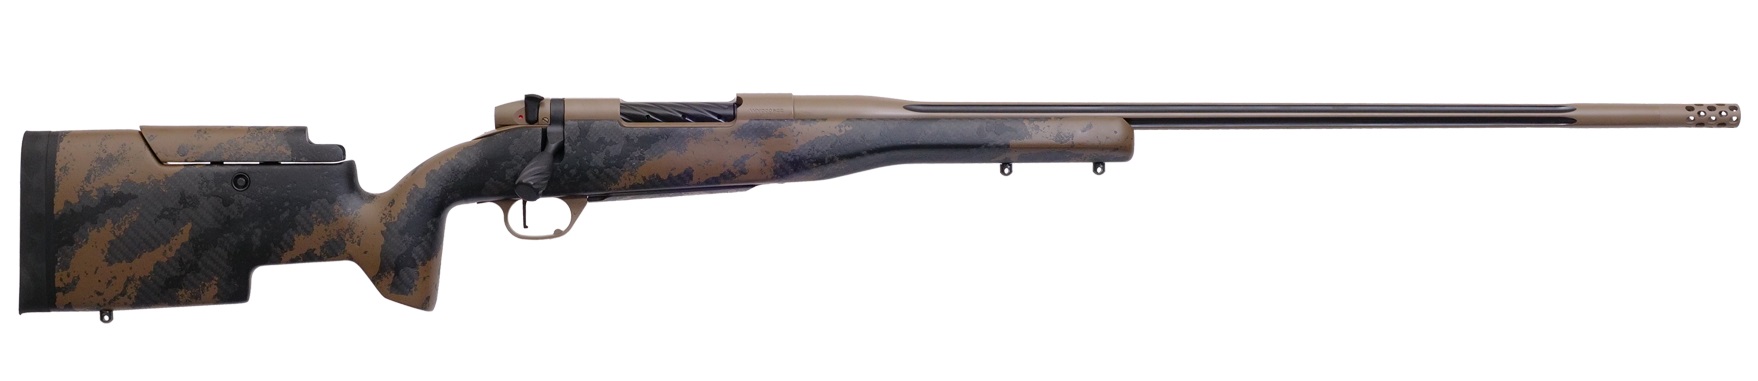 300 Weatherby Magnum